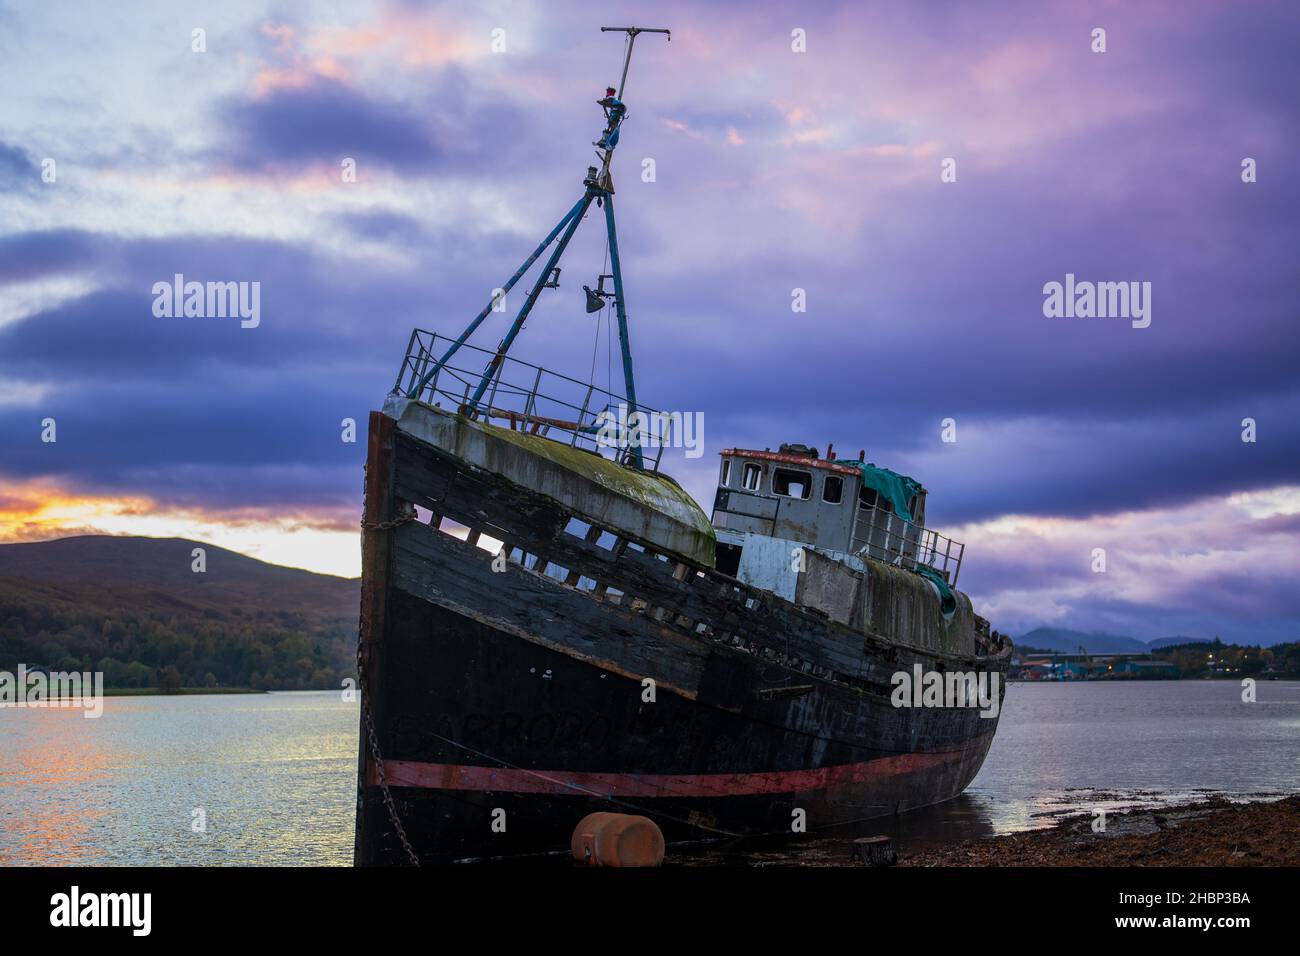 A grounded fishing boat on a beach at Loch Linnhe, with Ben Nevis in the background. Caol, Scotland, UK Stock Photo